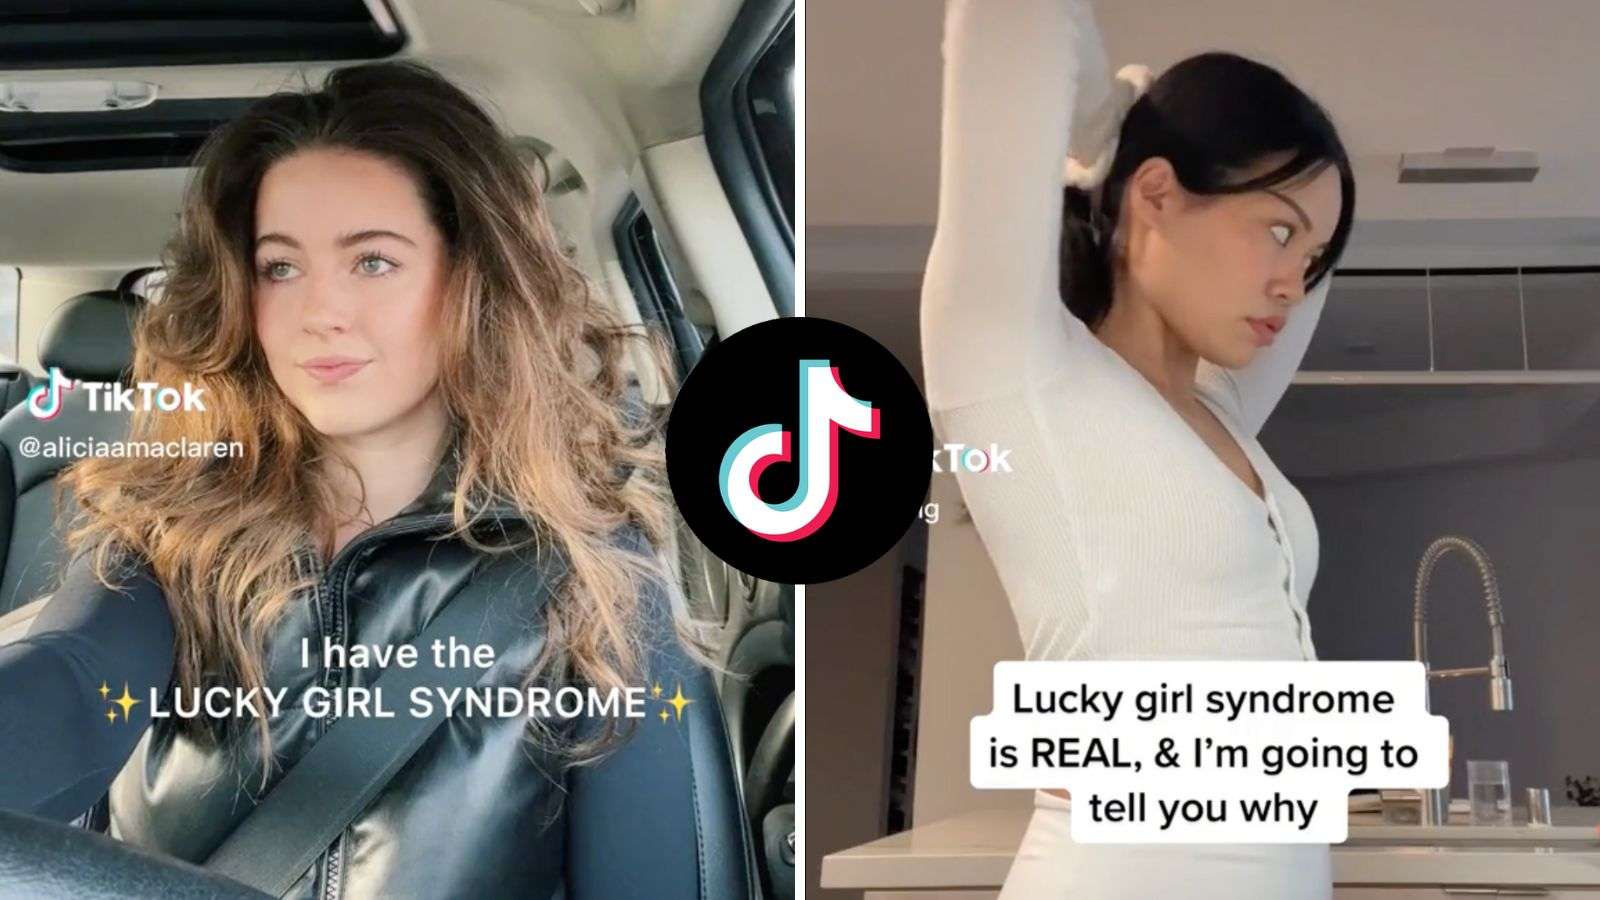 What is the 'lucky girl syndrome' on TikTok?